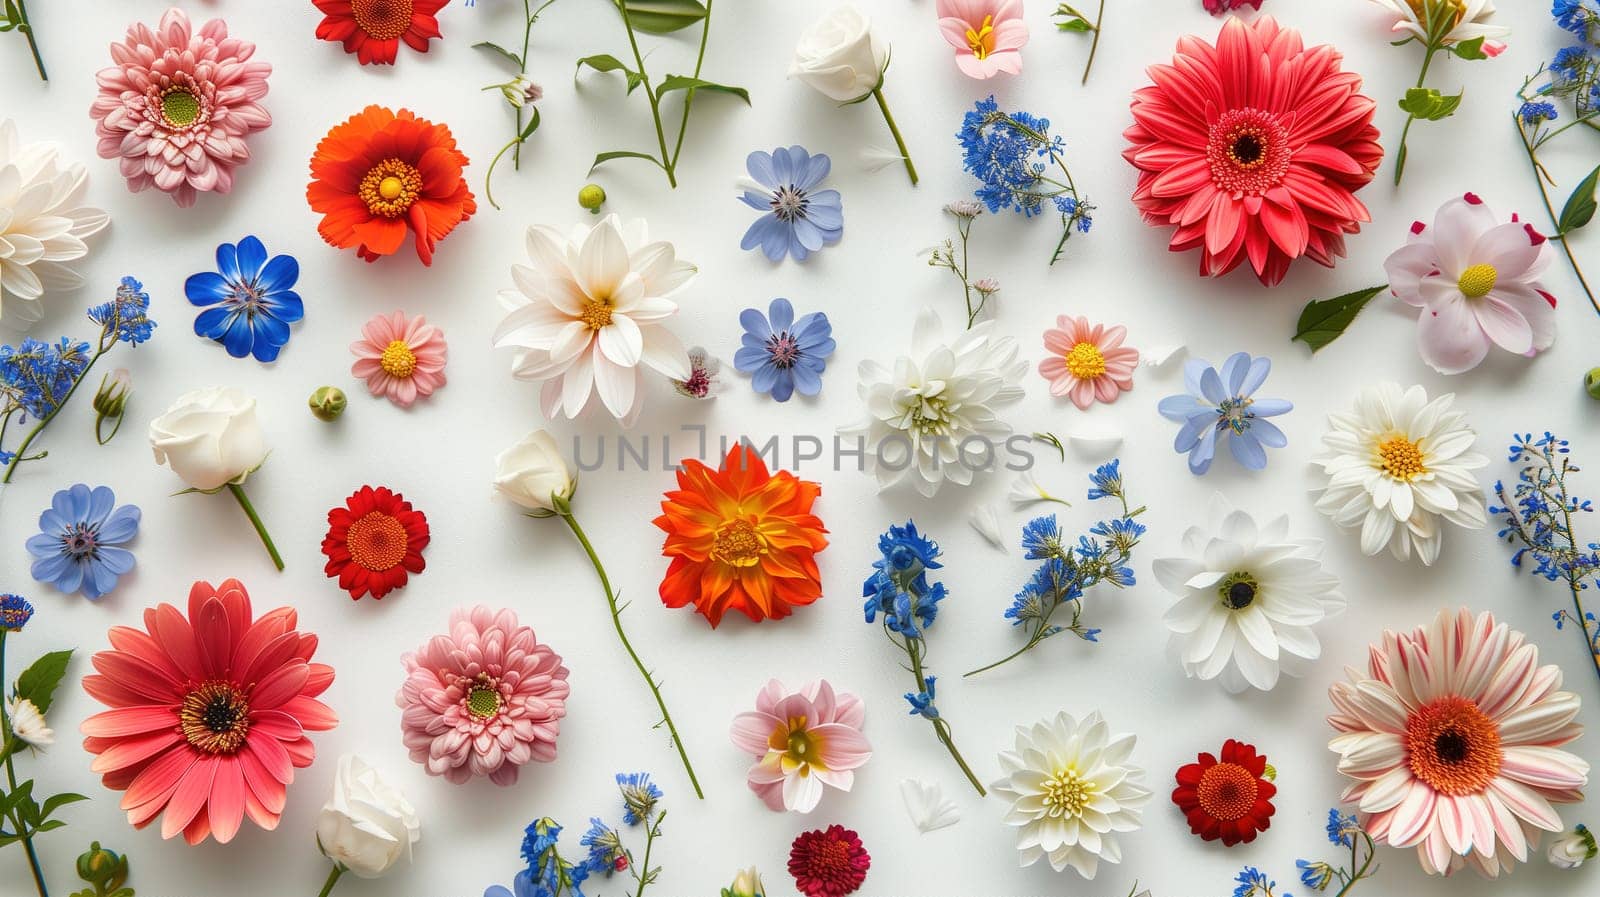 A cluster of various colored flowers, including roses, daisies, and tulips, are spread out on a clean white table. Each bloom showcases vibrant hues and unique shapes, creating a visually appealing display.